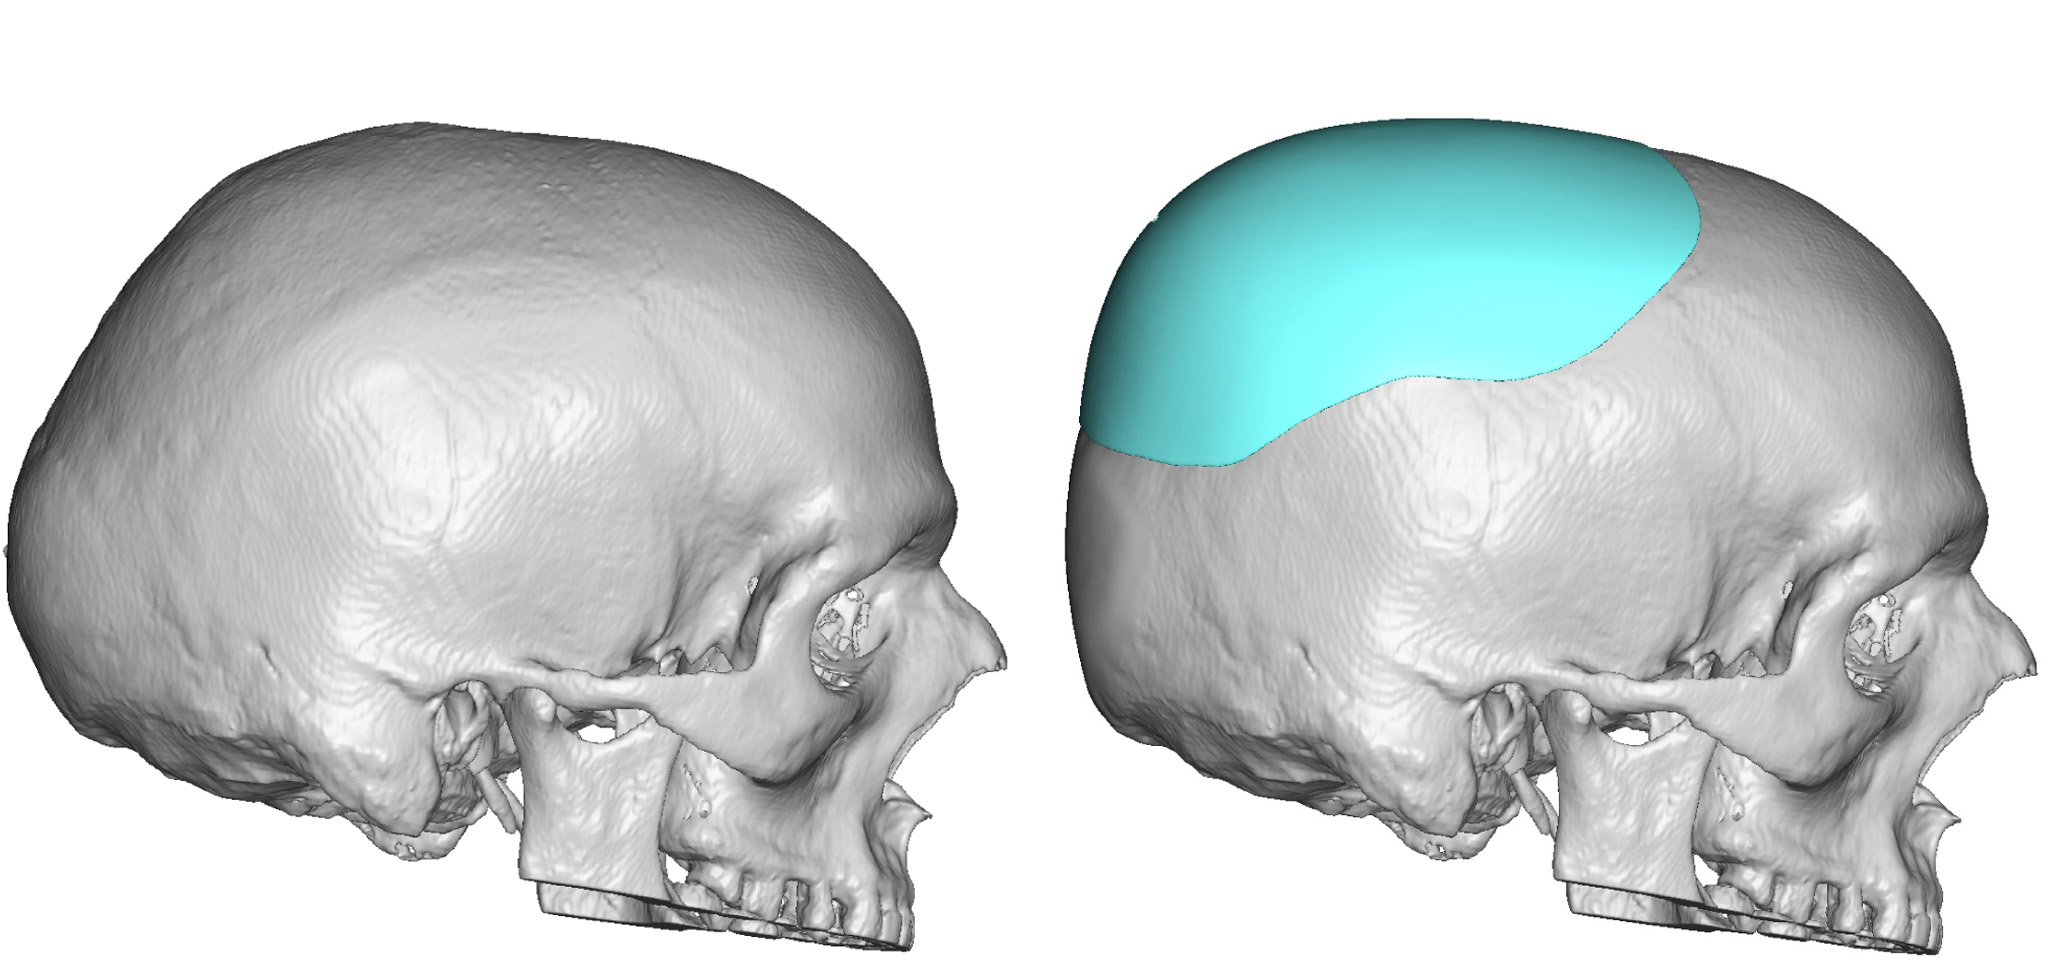 Custom Skull Implant With Occipital Skull Reduction Design Side View Dr